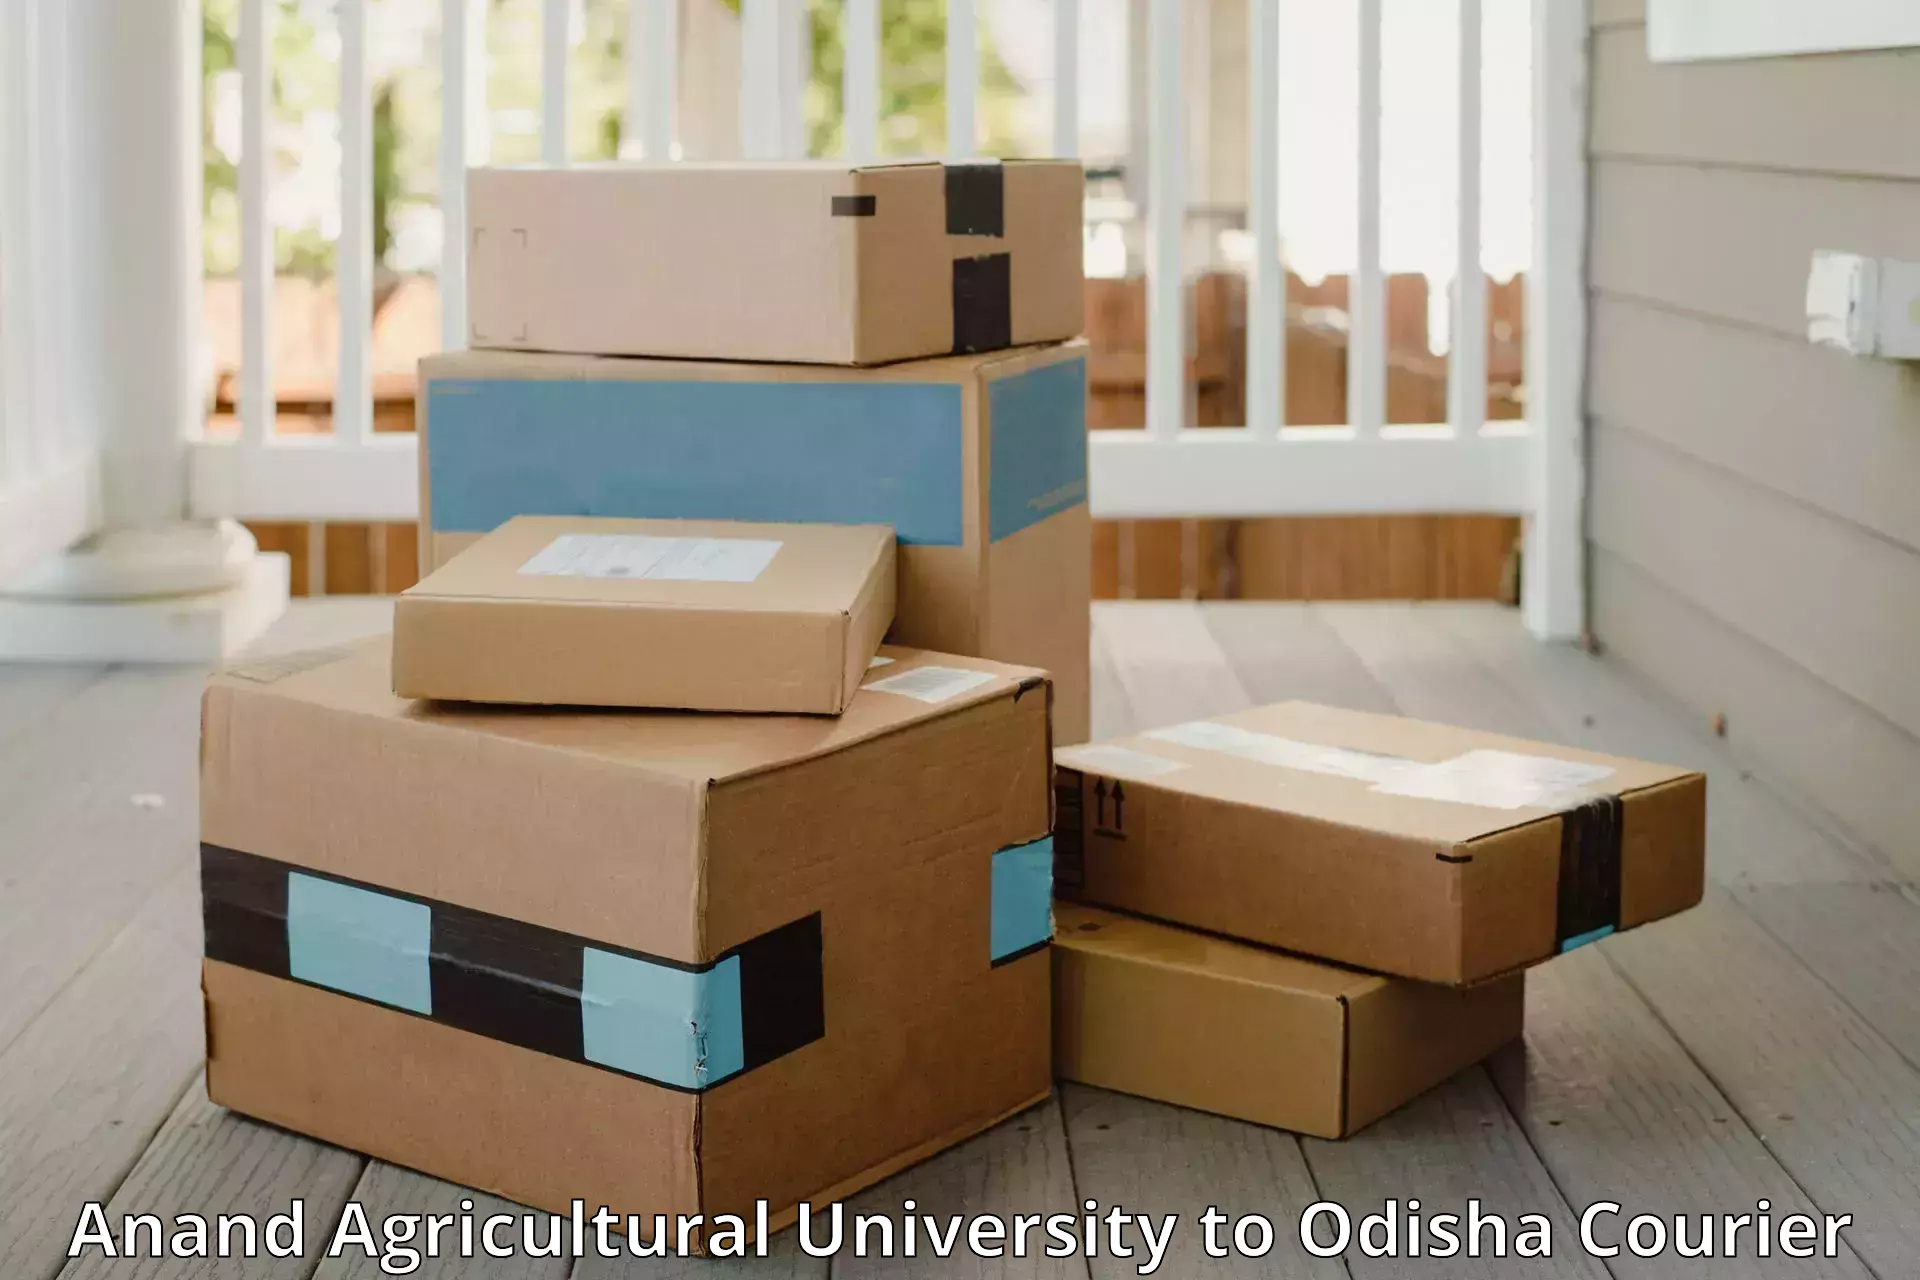 Luggage transport operations Anand Agricultural University to Badamba